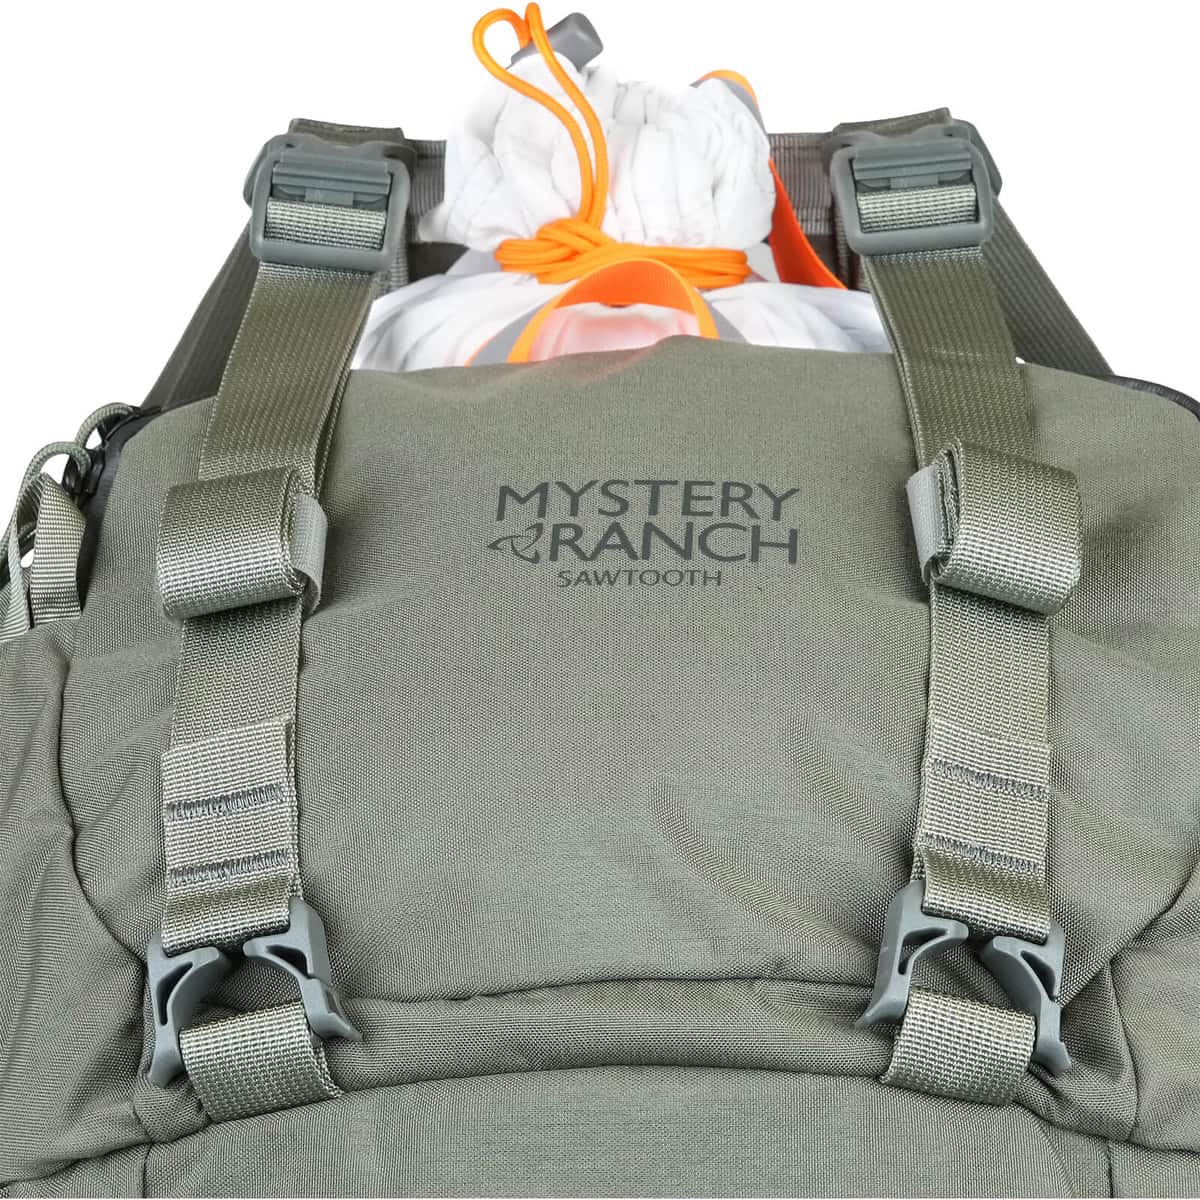 888564176825 110889 Mystery Ranch Sawtooth 45 Small Hunting Backpack Foliage Overload Shelf with Game Bag 40 Cinch Detail